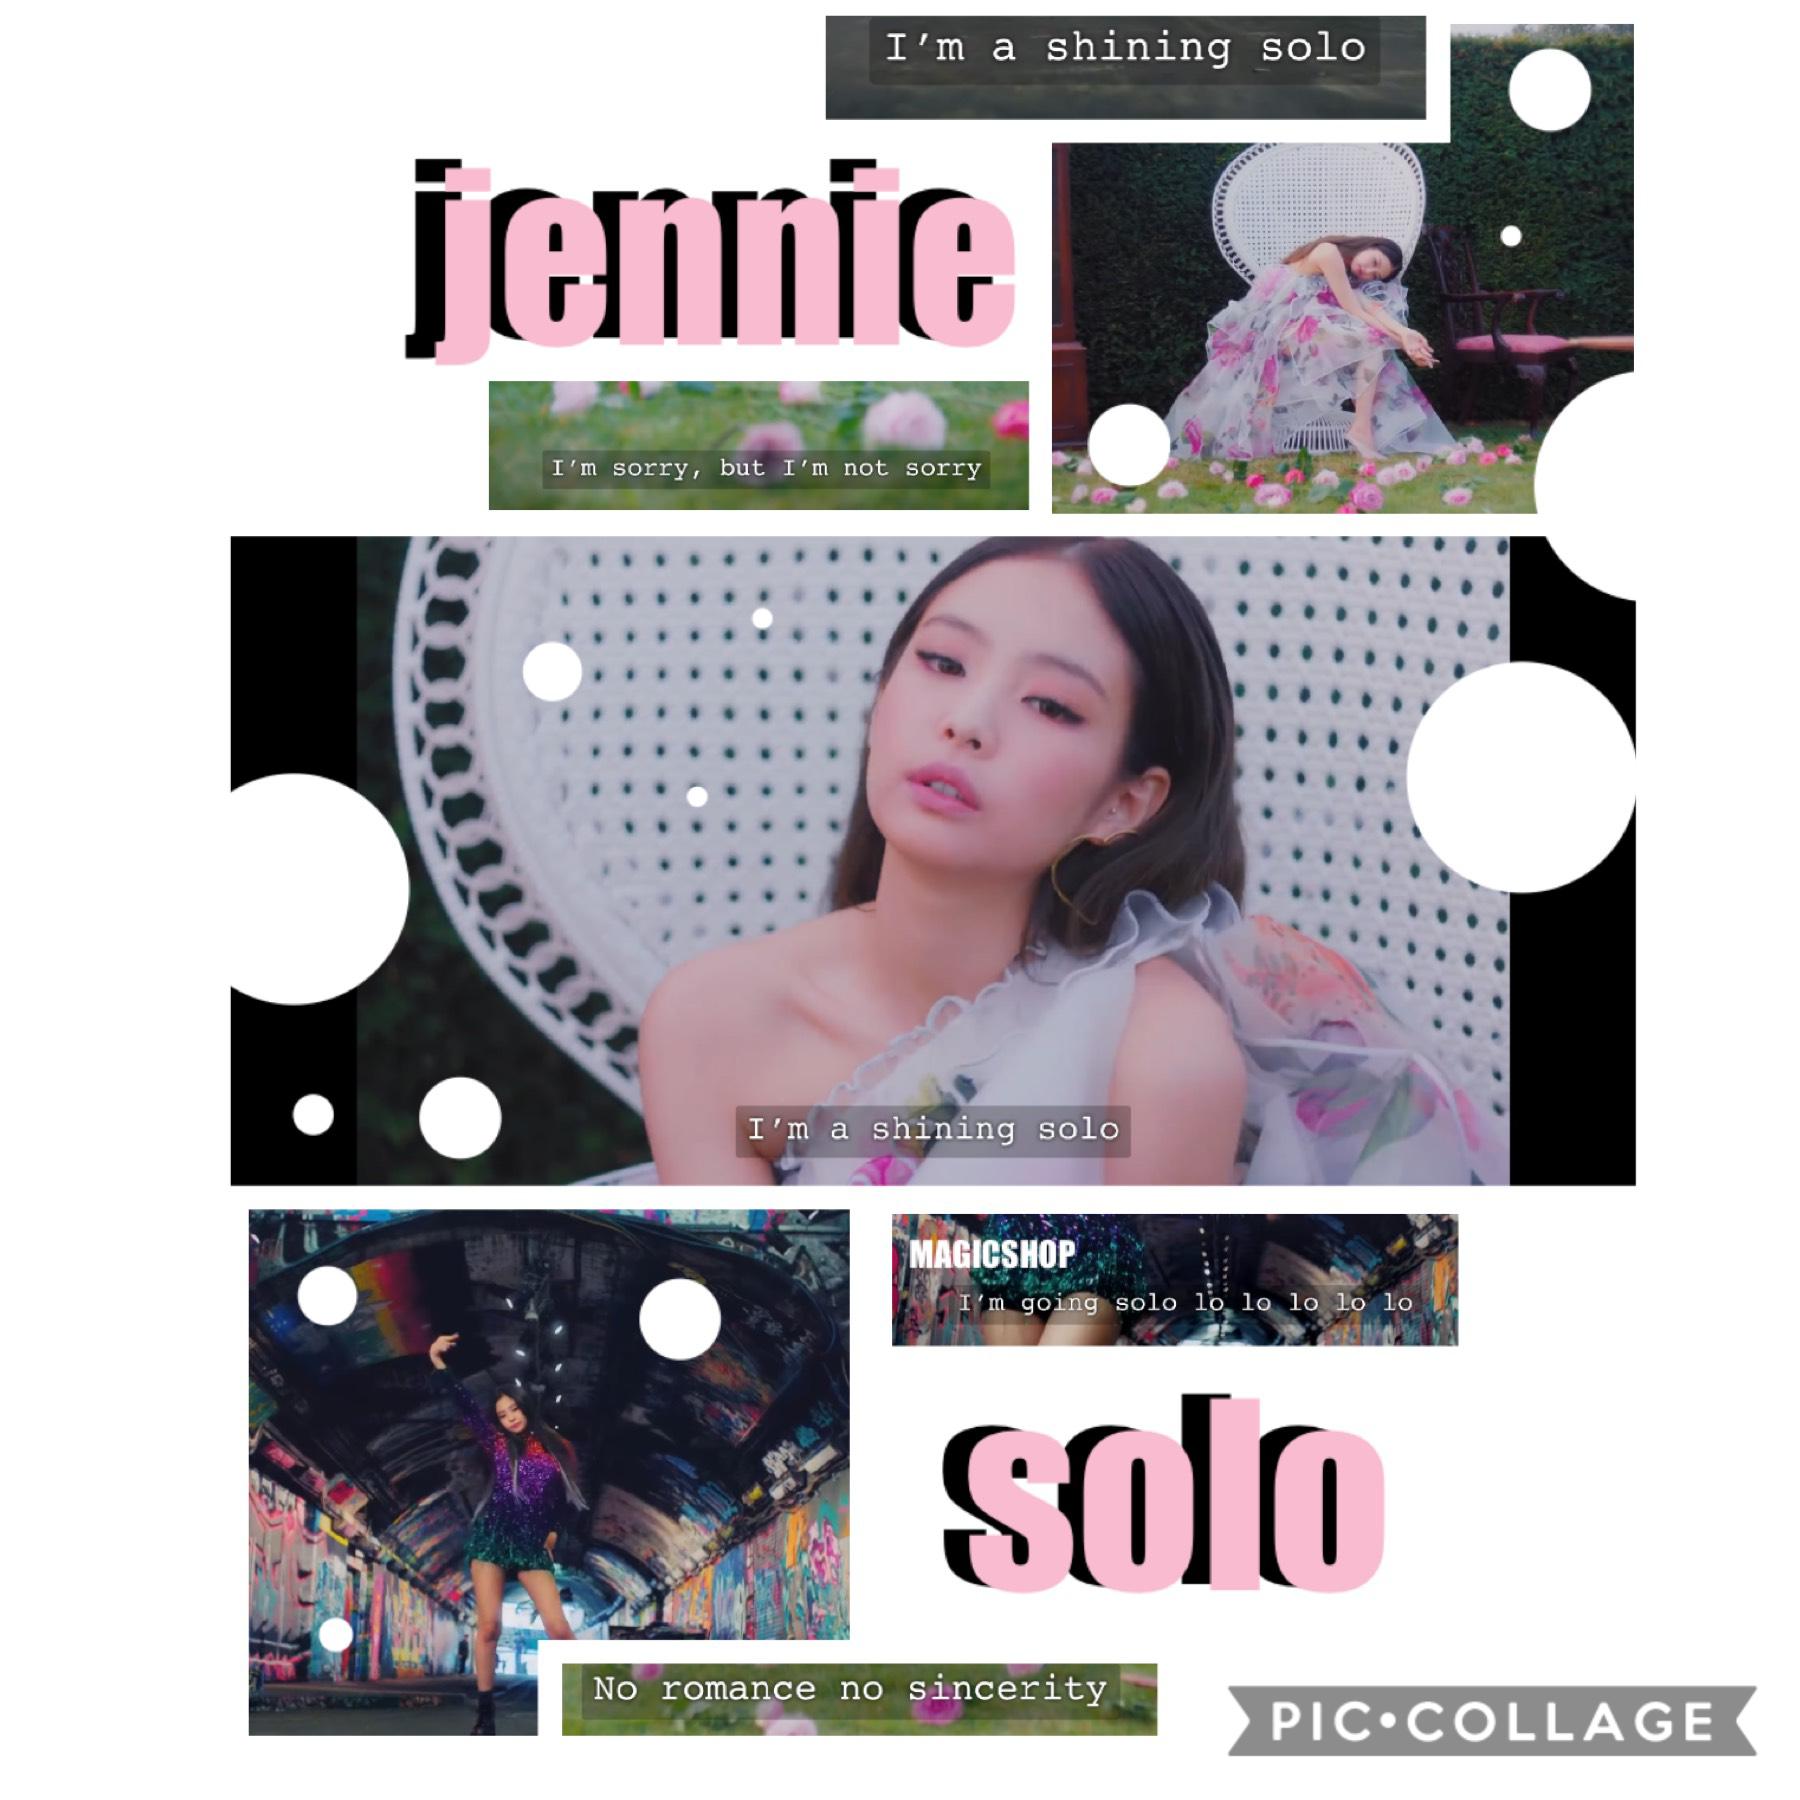 here’s a quick edit of my faveee !!! solo was amazing and the dance thing she did was cuteeeee ksksks
anyway love u guysss <3 bYee